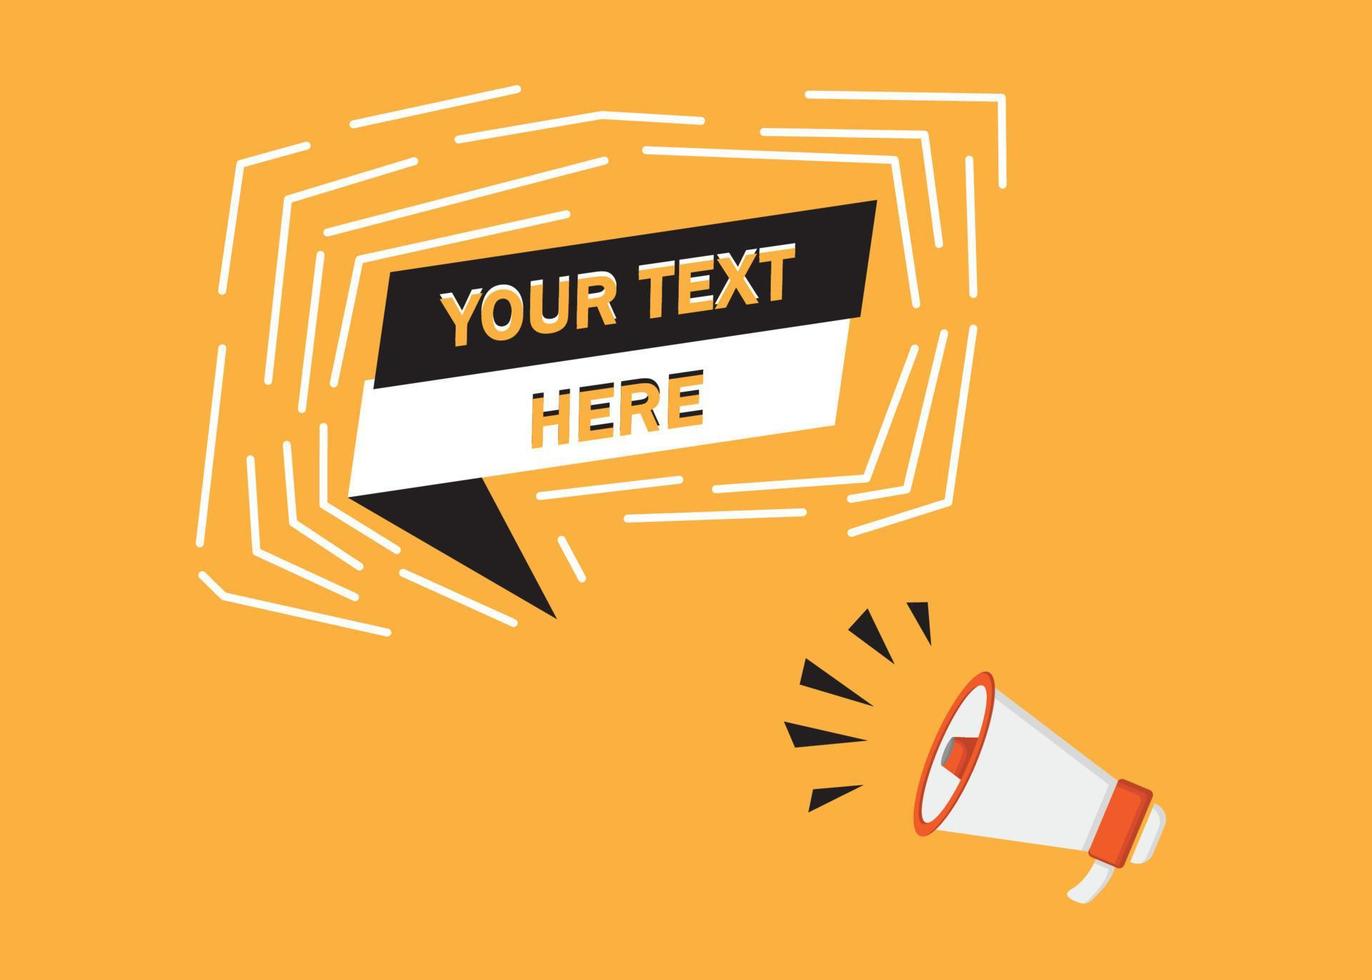 your text here poster for, website, promotion, social media vector